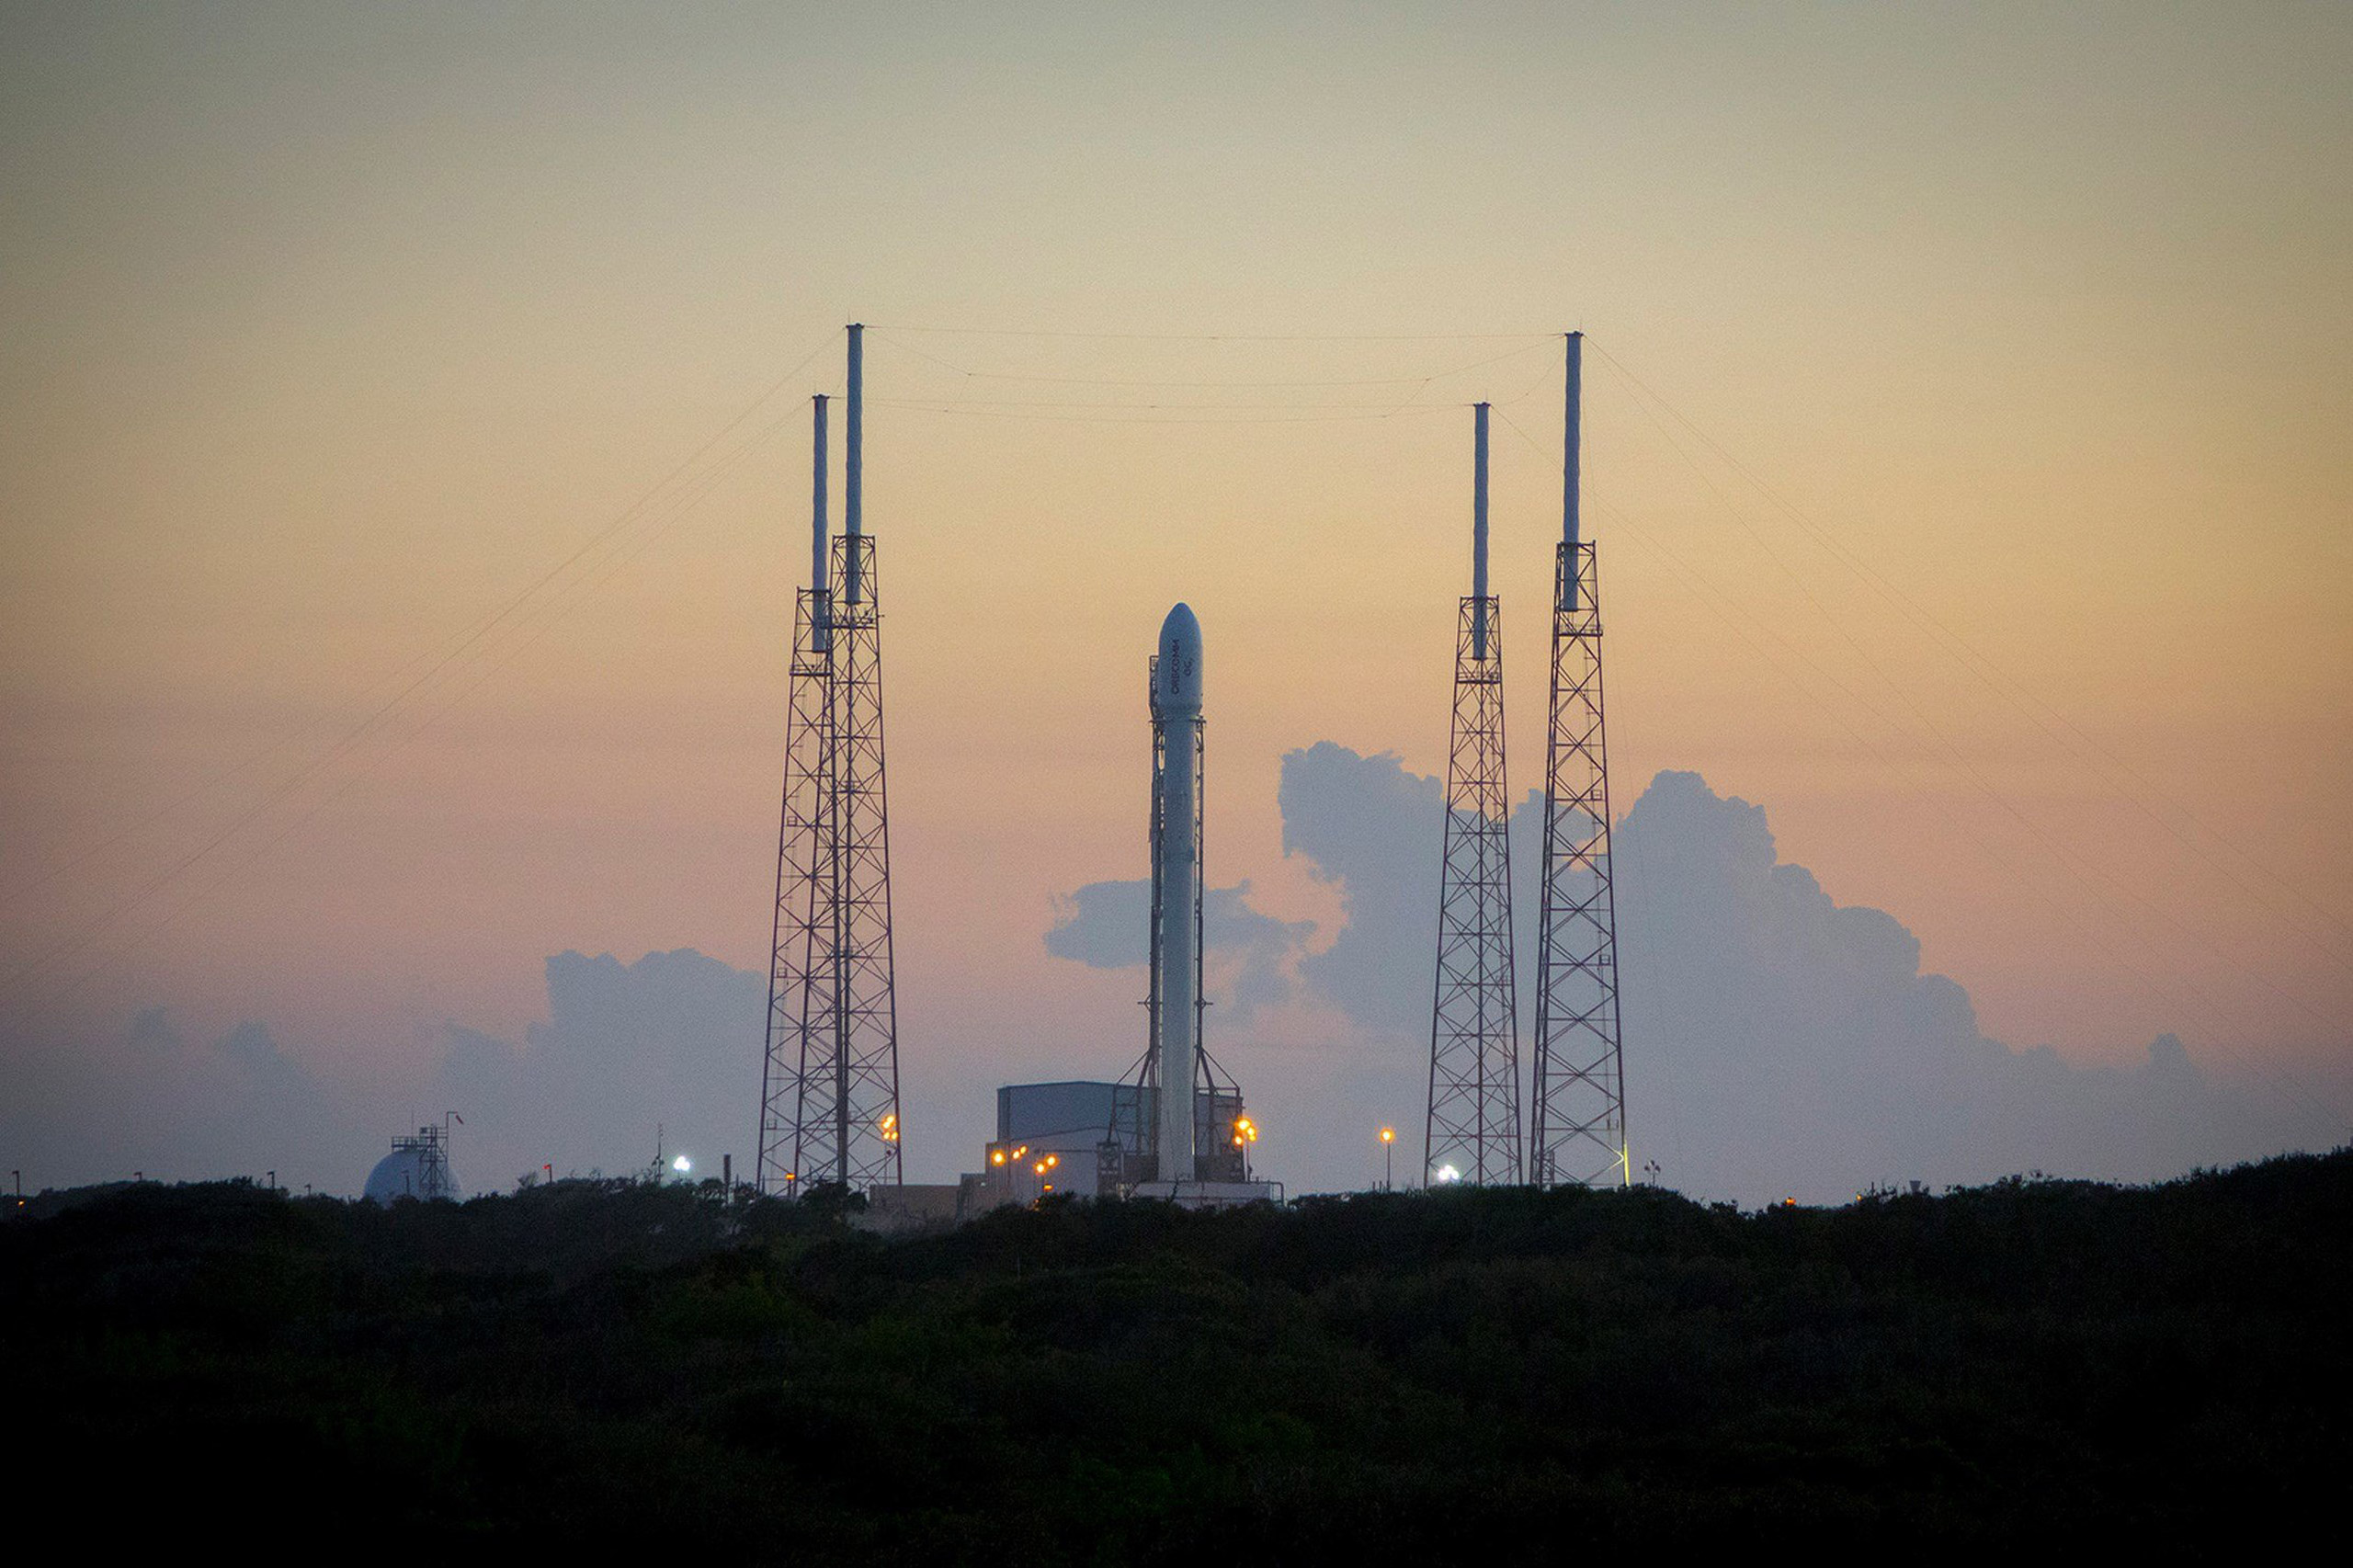 The Falcon 9 rocket, poised to launch at 8:29 pm on Dec. 21, 2015 from Cape Canaveral, Fla., as seen on Dec. 16, 2015. (HO/AFP/Getty Images)